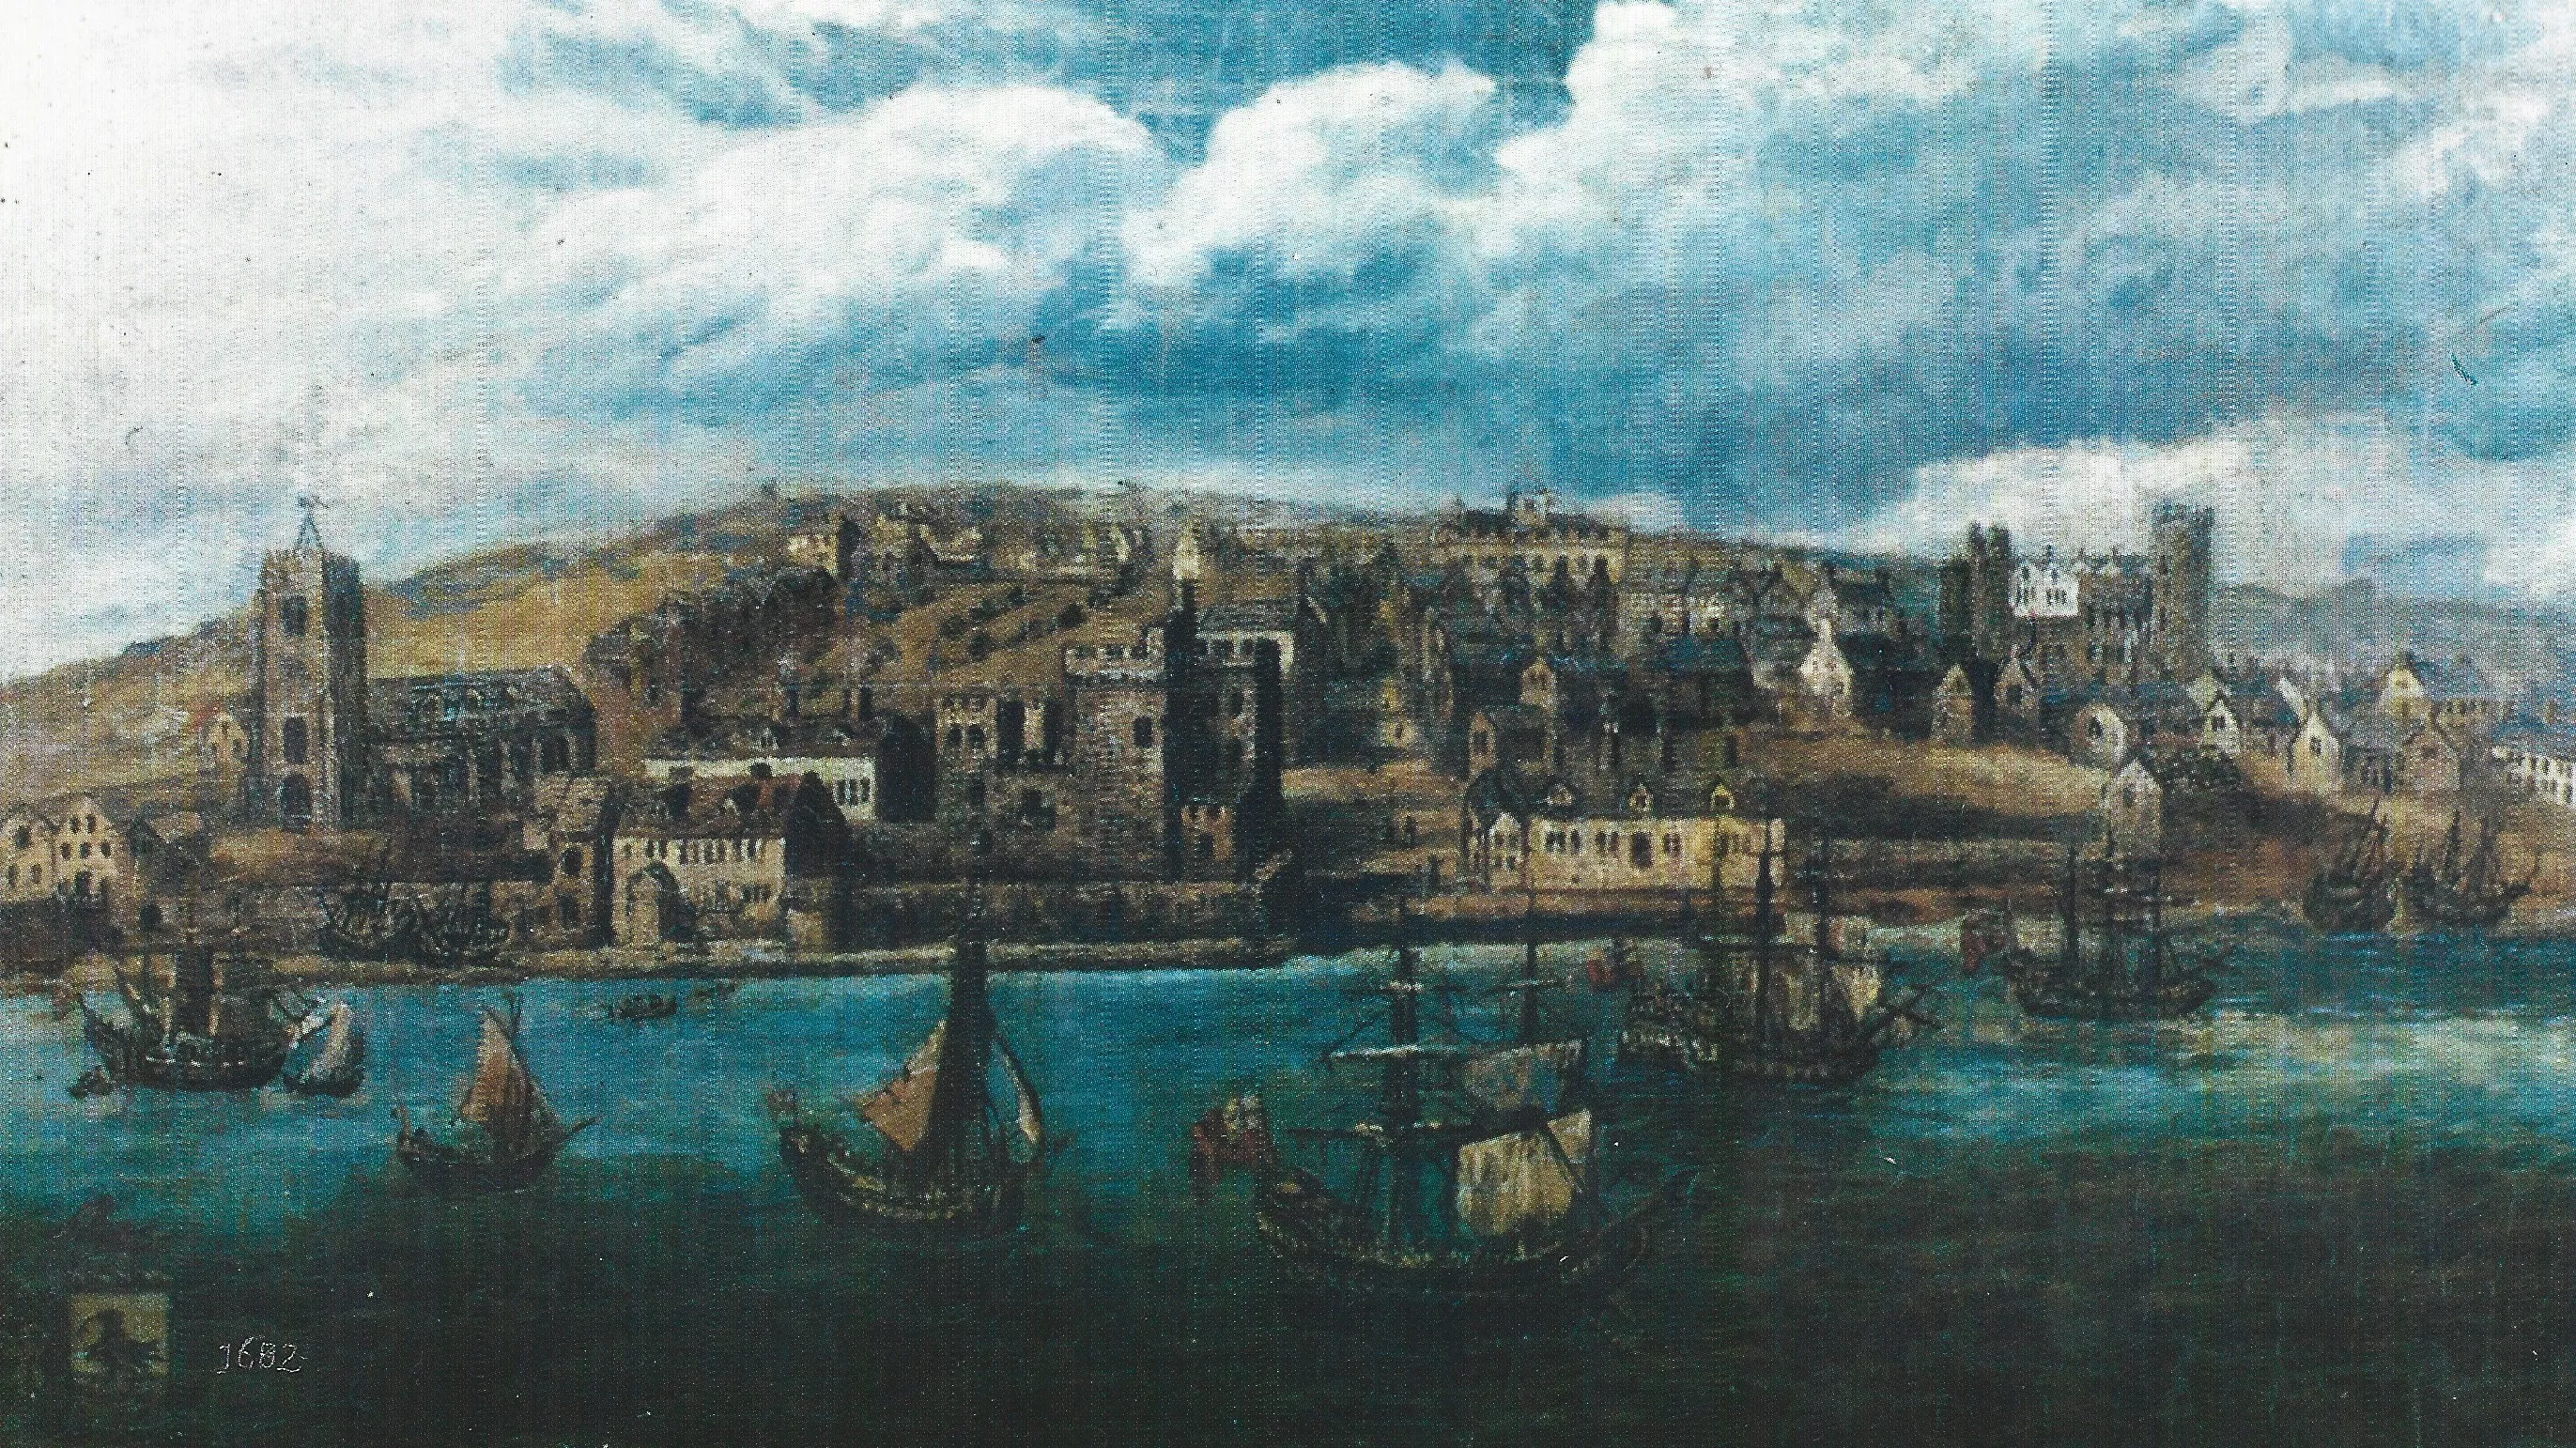 The 'Peters' painting 1682 of Liverpool